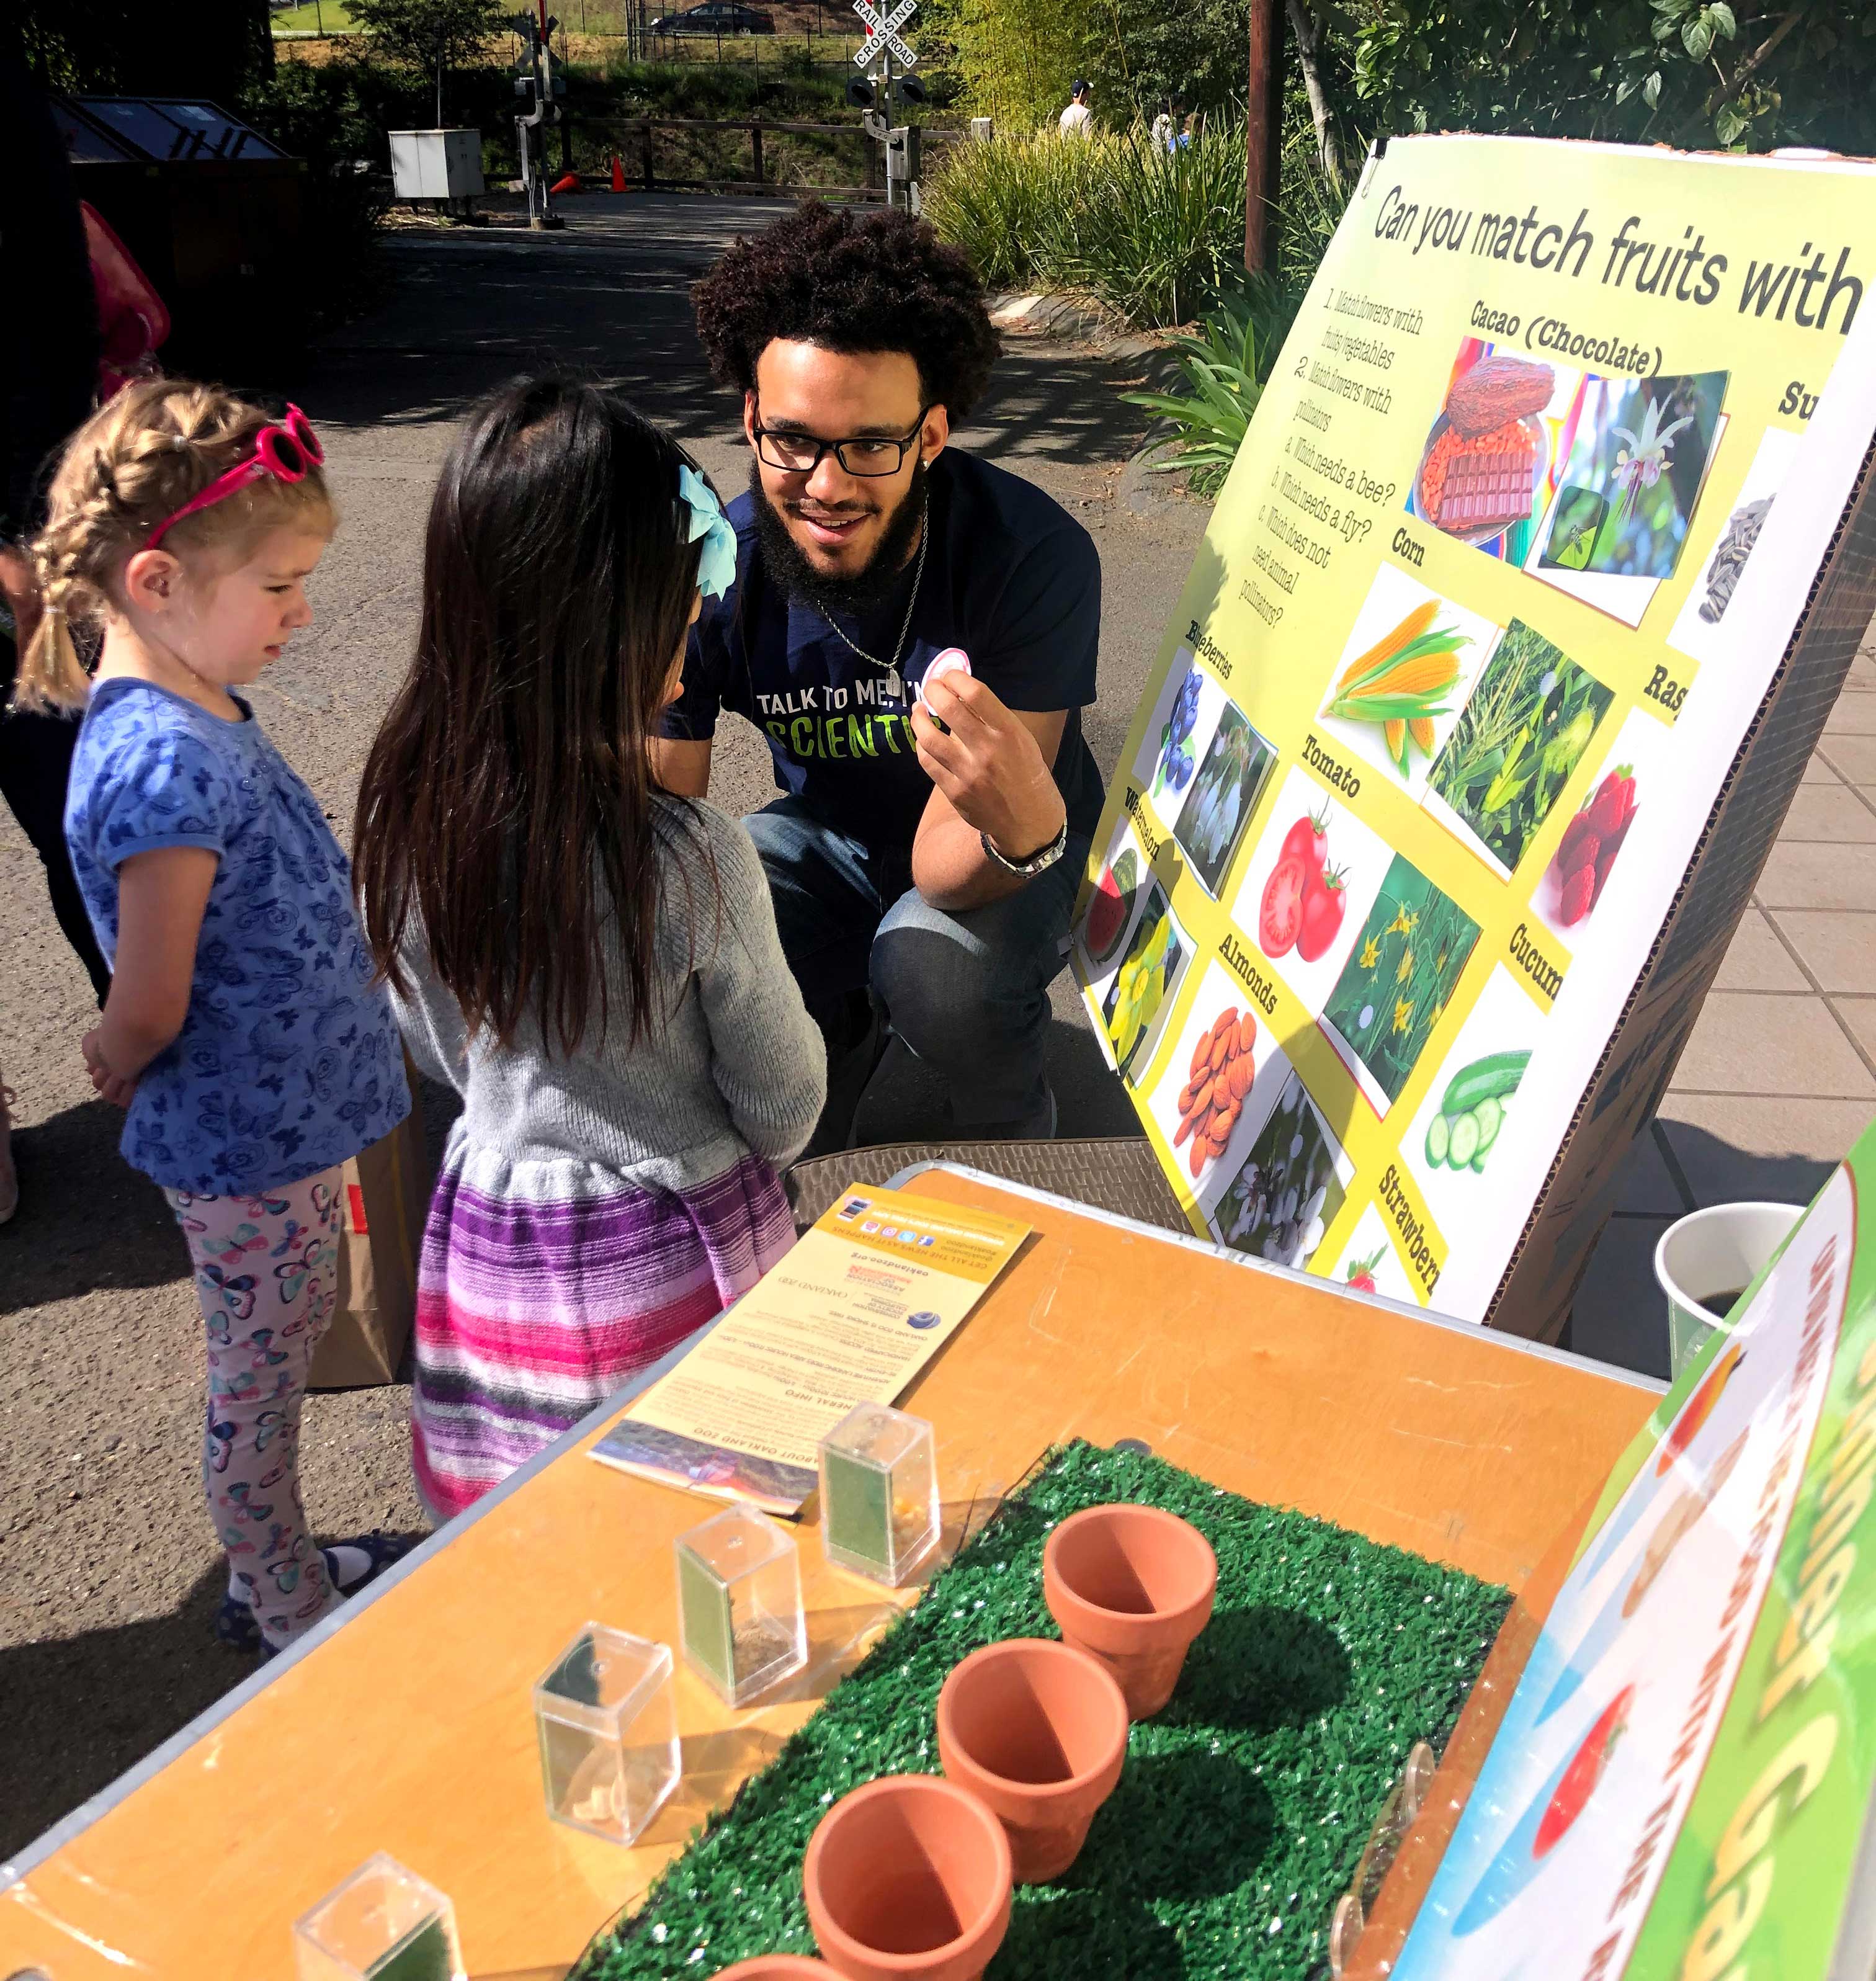 A man teaching young children about fruits in an outdoor setting